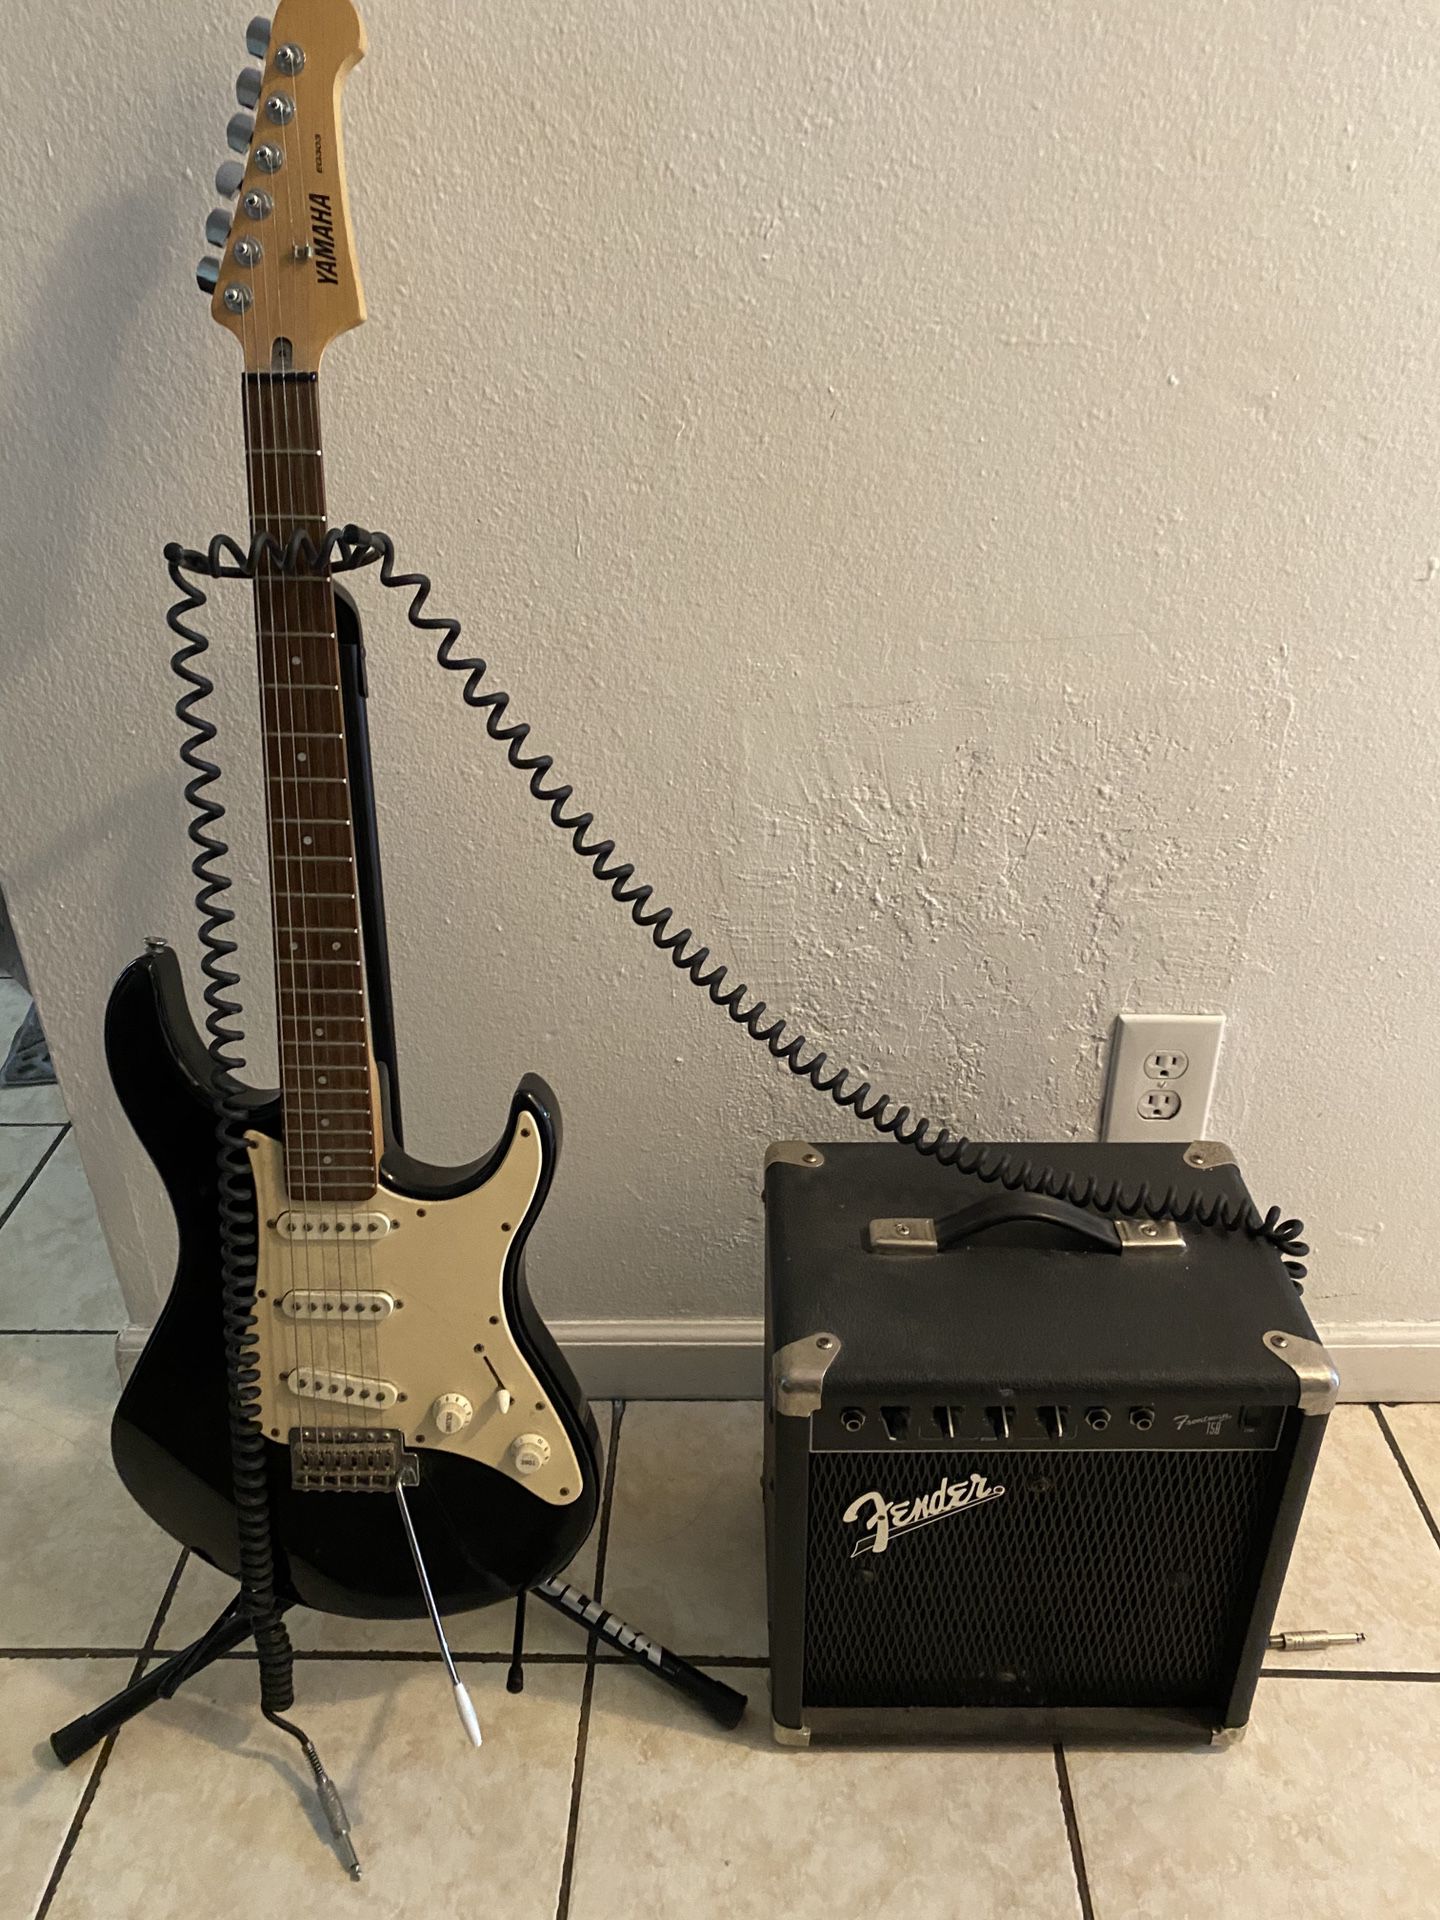 Yamaha Strato caster and Fender Amp